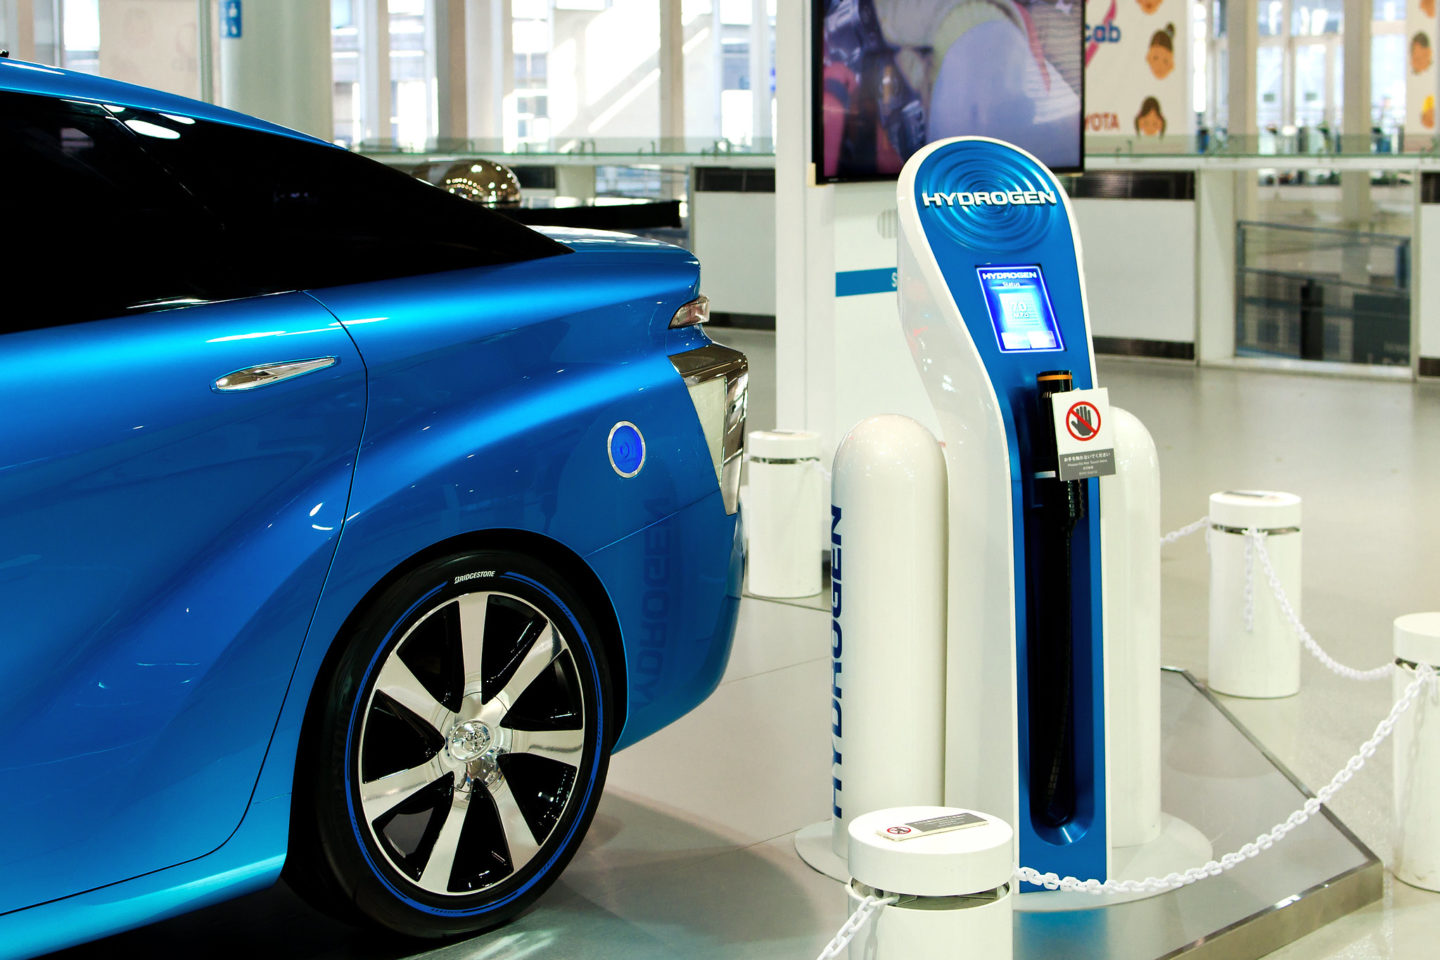 Will the green hydrogen be the future of climate-neutral Europe?